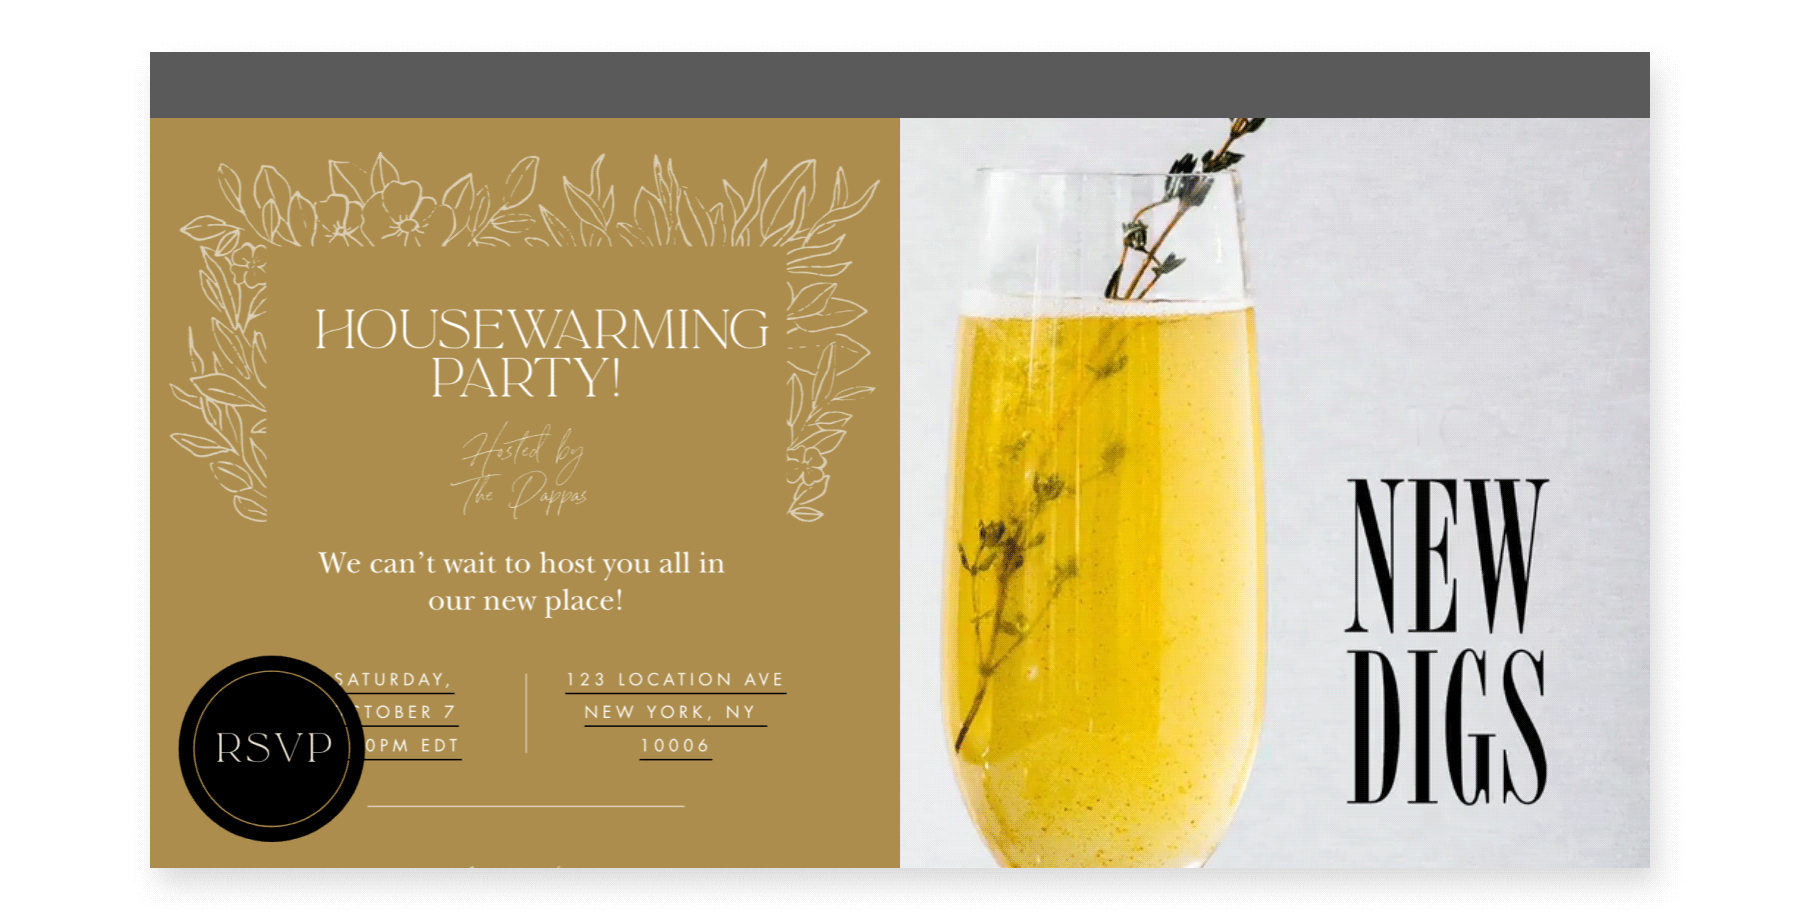 An online invite for a housewarming party with a photo of a yellow cocktail in a flute glass and the words “cheers to new digs” animating beside it.